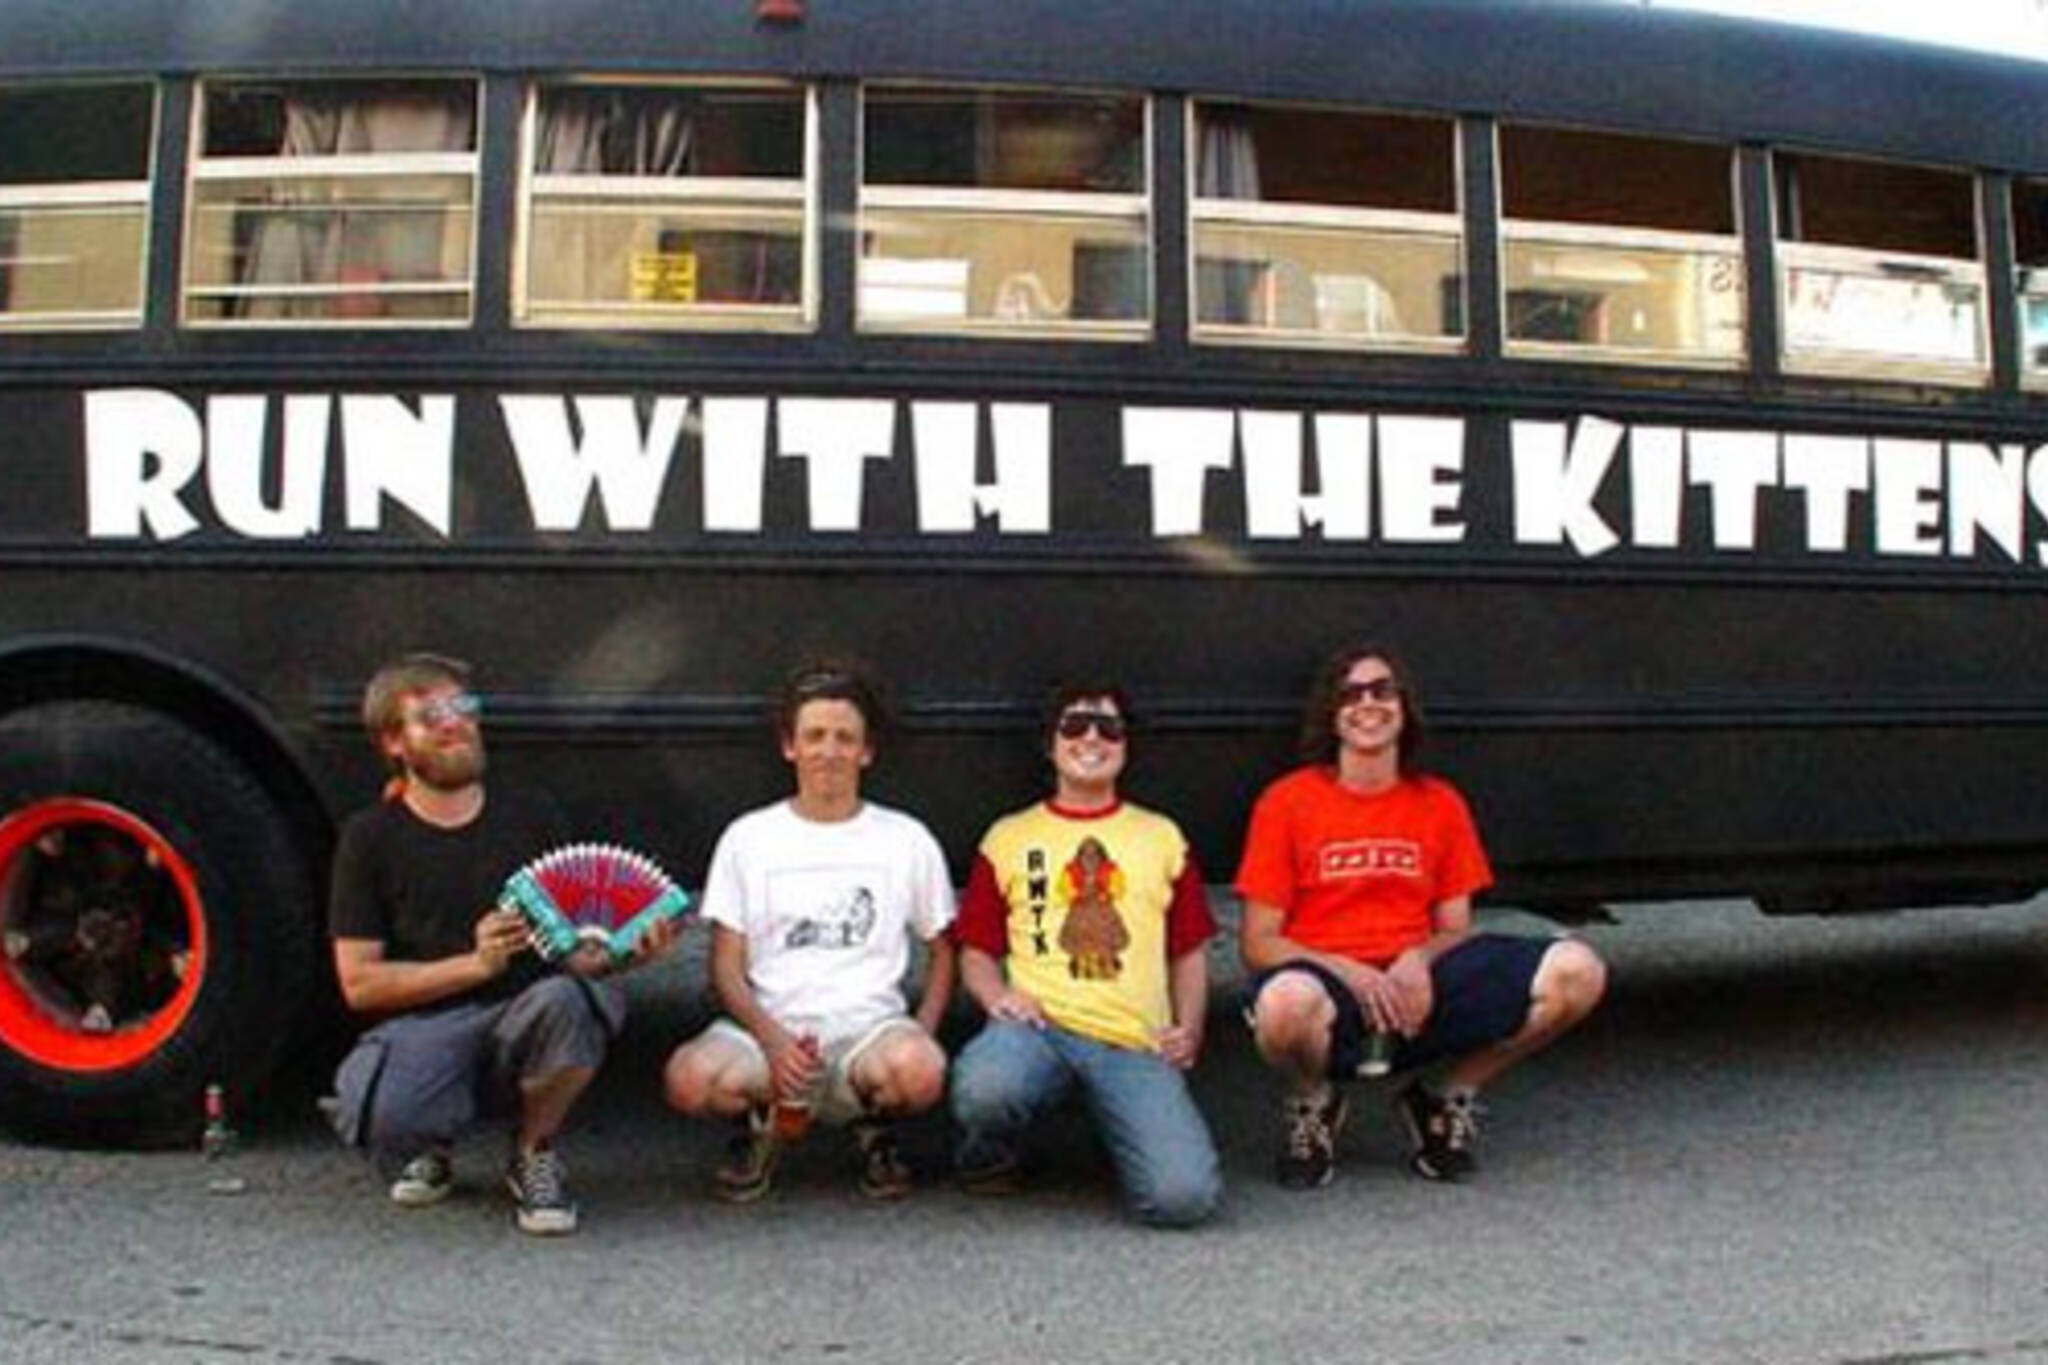 Run with the Kittens and their legendary tour bus